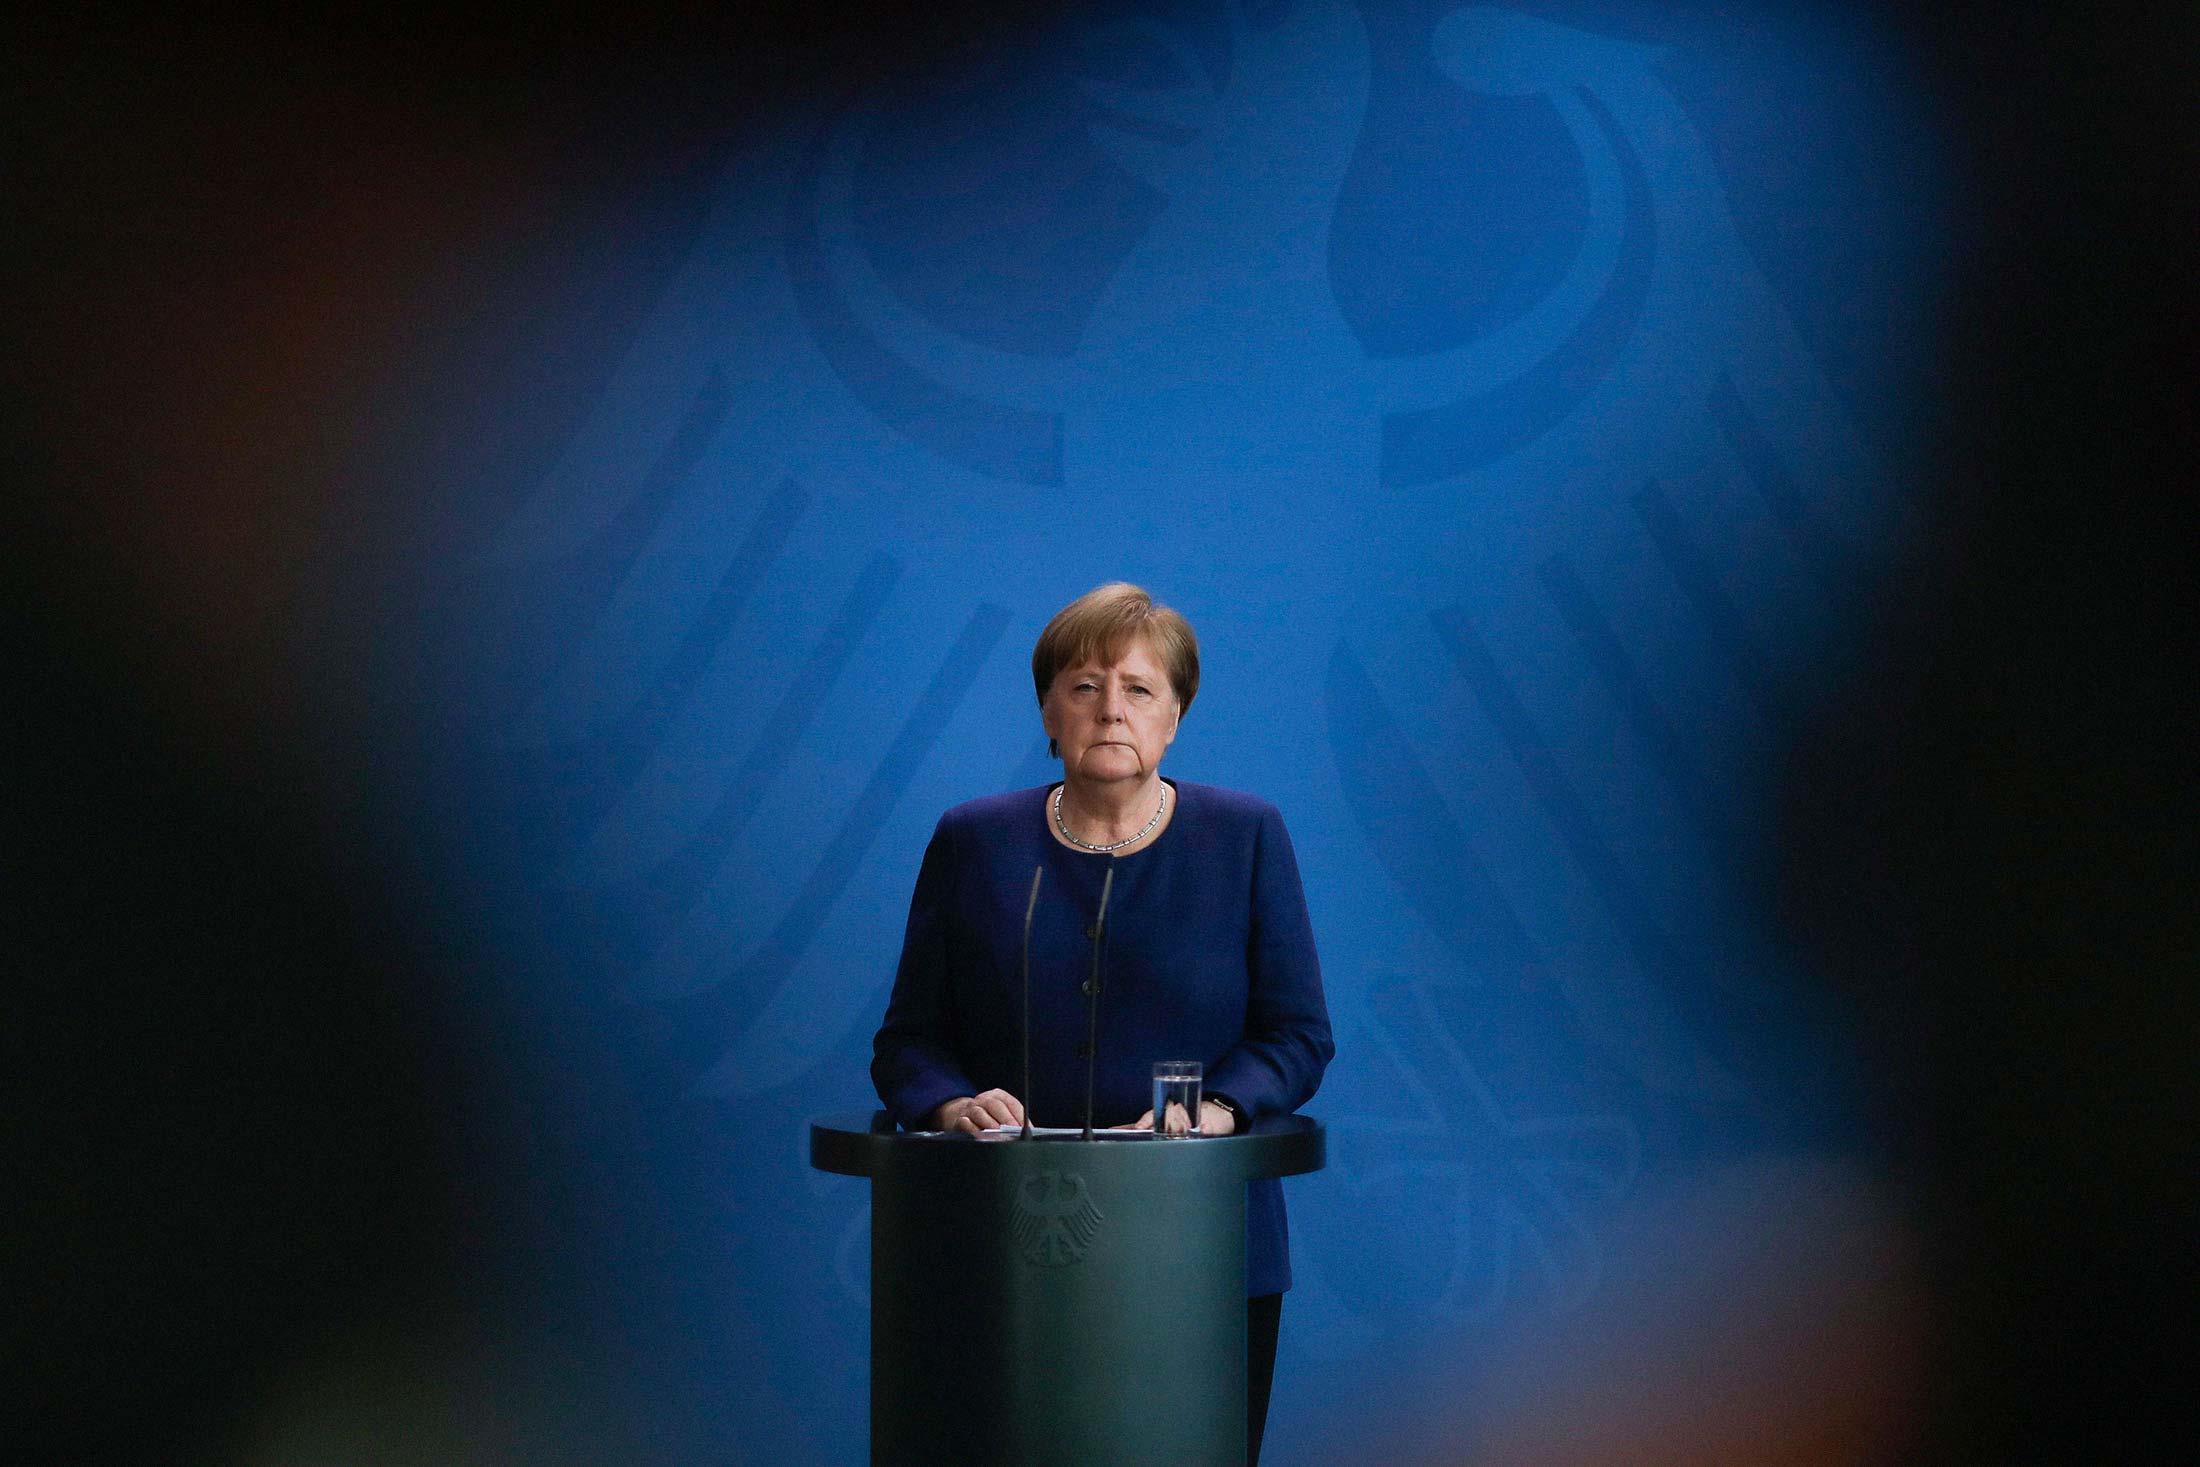 Chancellor Angela Merkel briefs the media about the German government’s measures to avoid further spread of the coronavirus on April 6 in Berlin.